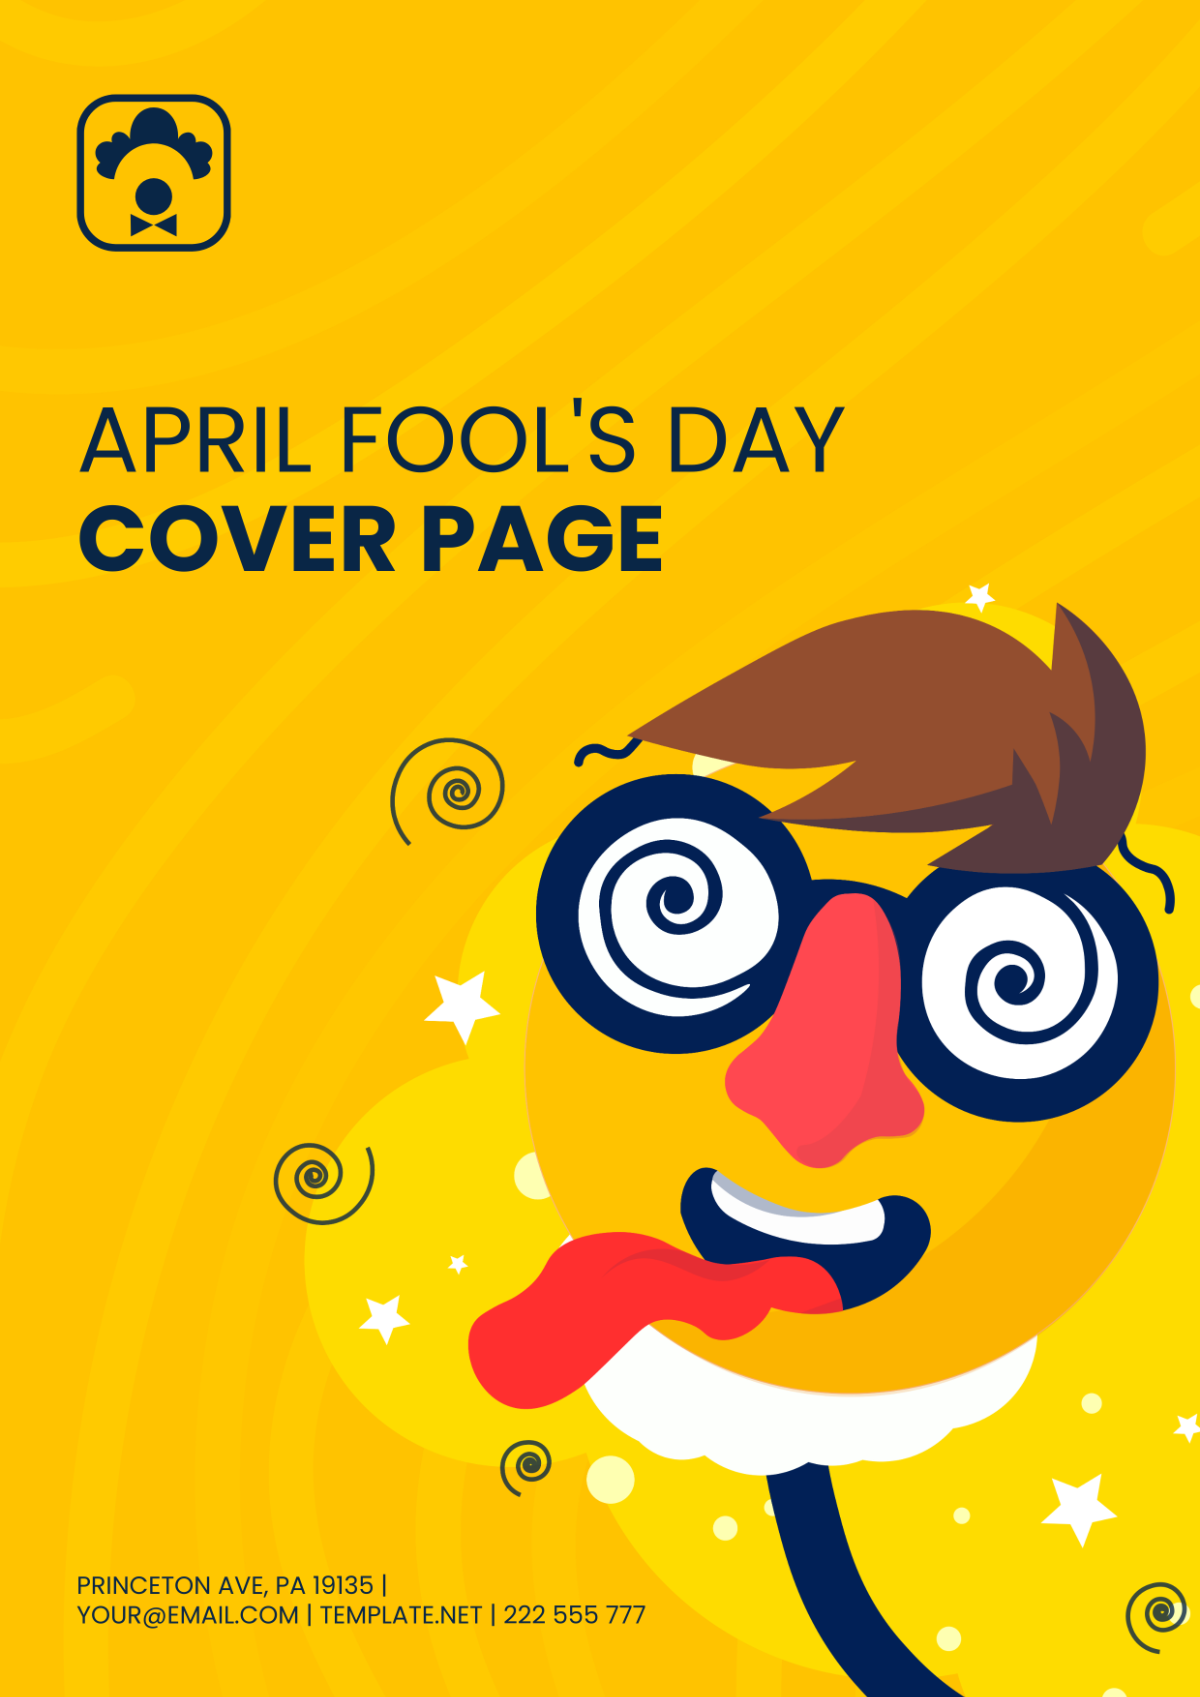 April Fool's Day Cover Page Template